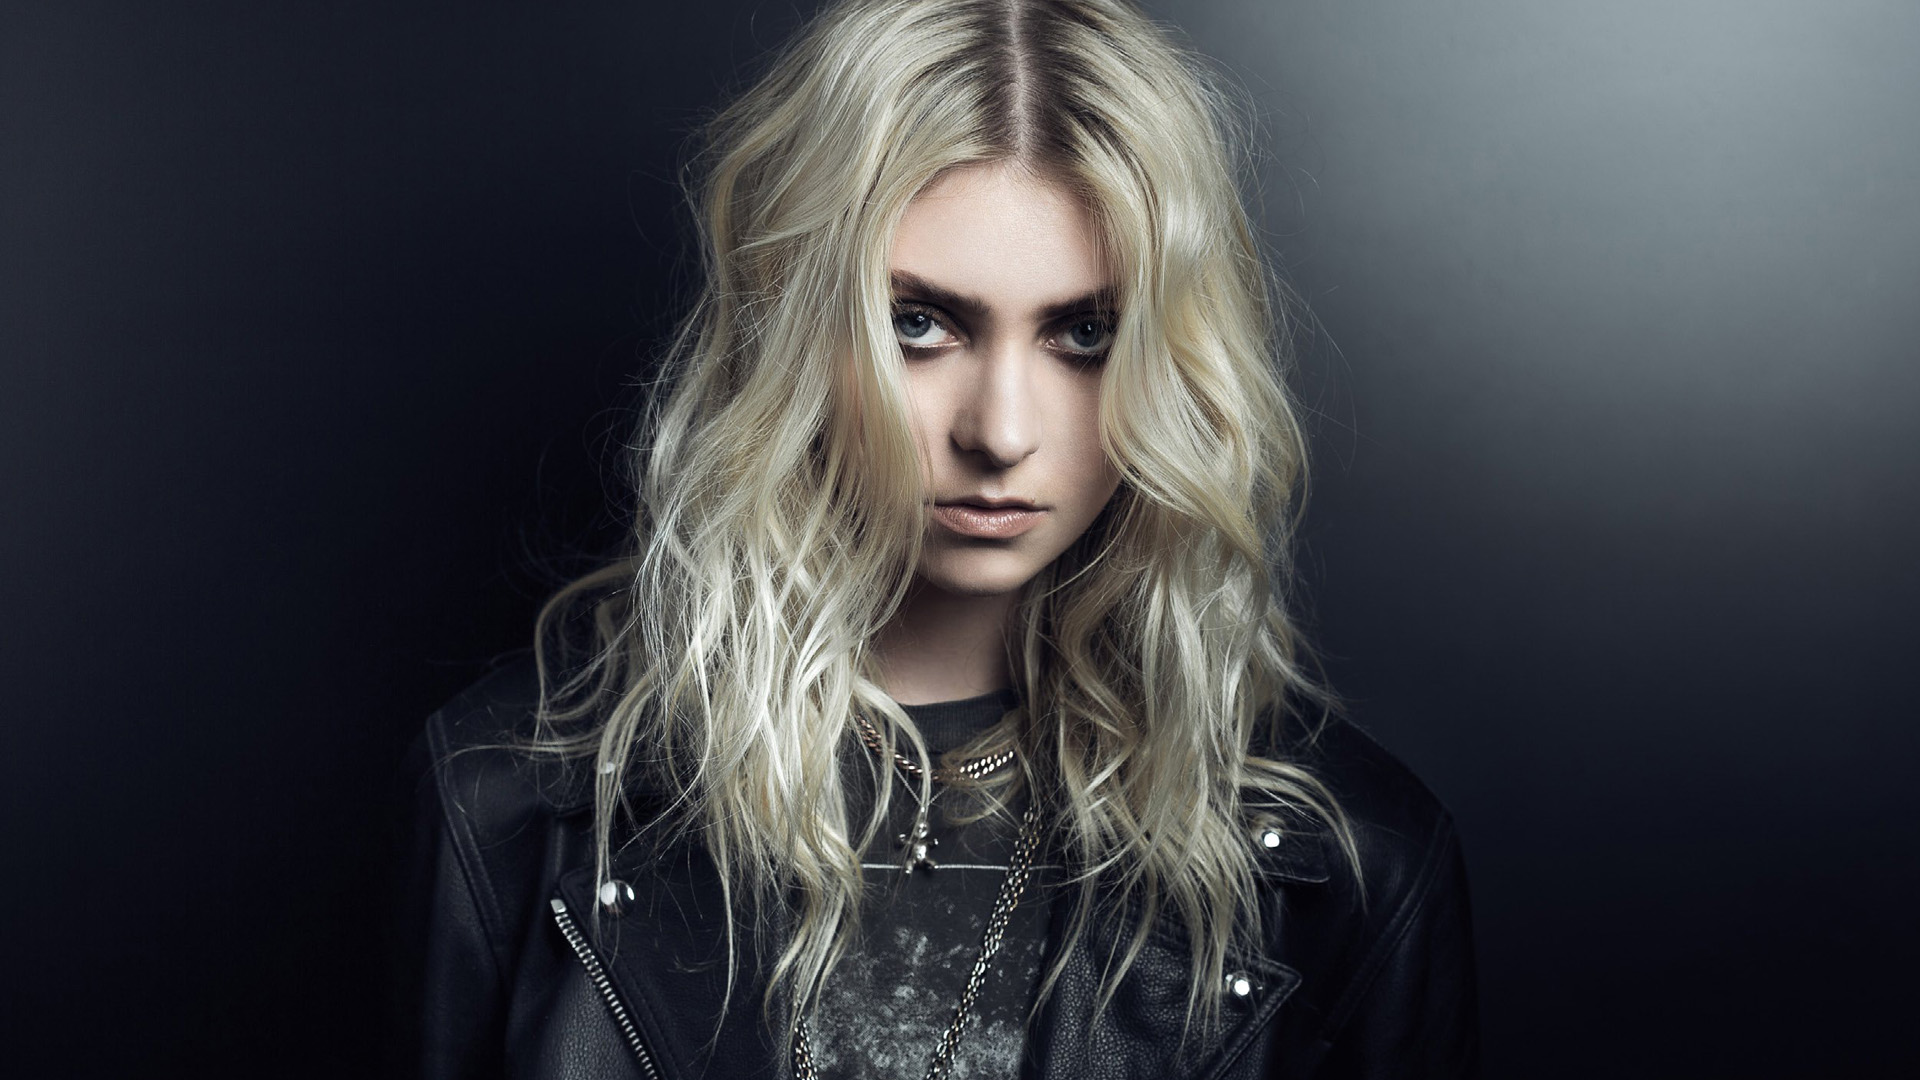 Taylor Momsen Net Worth - From Child Actress To Rockstar